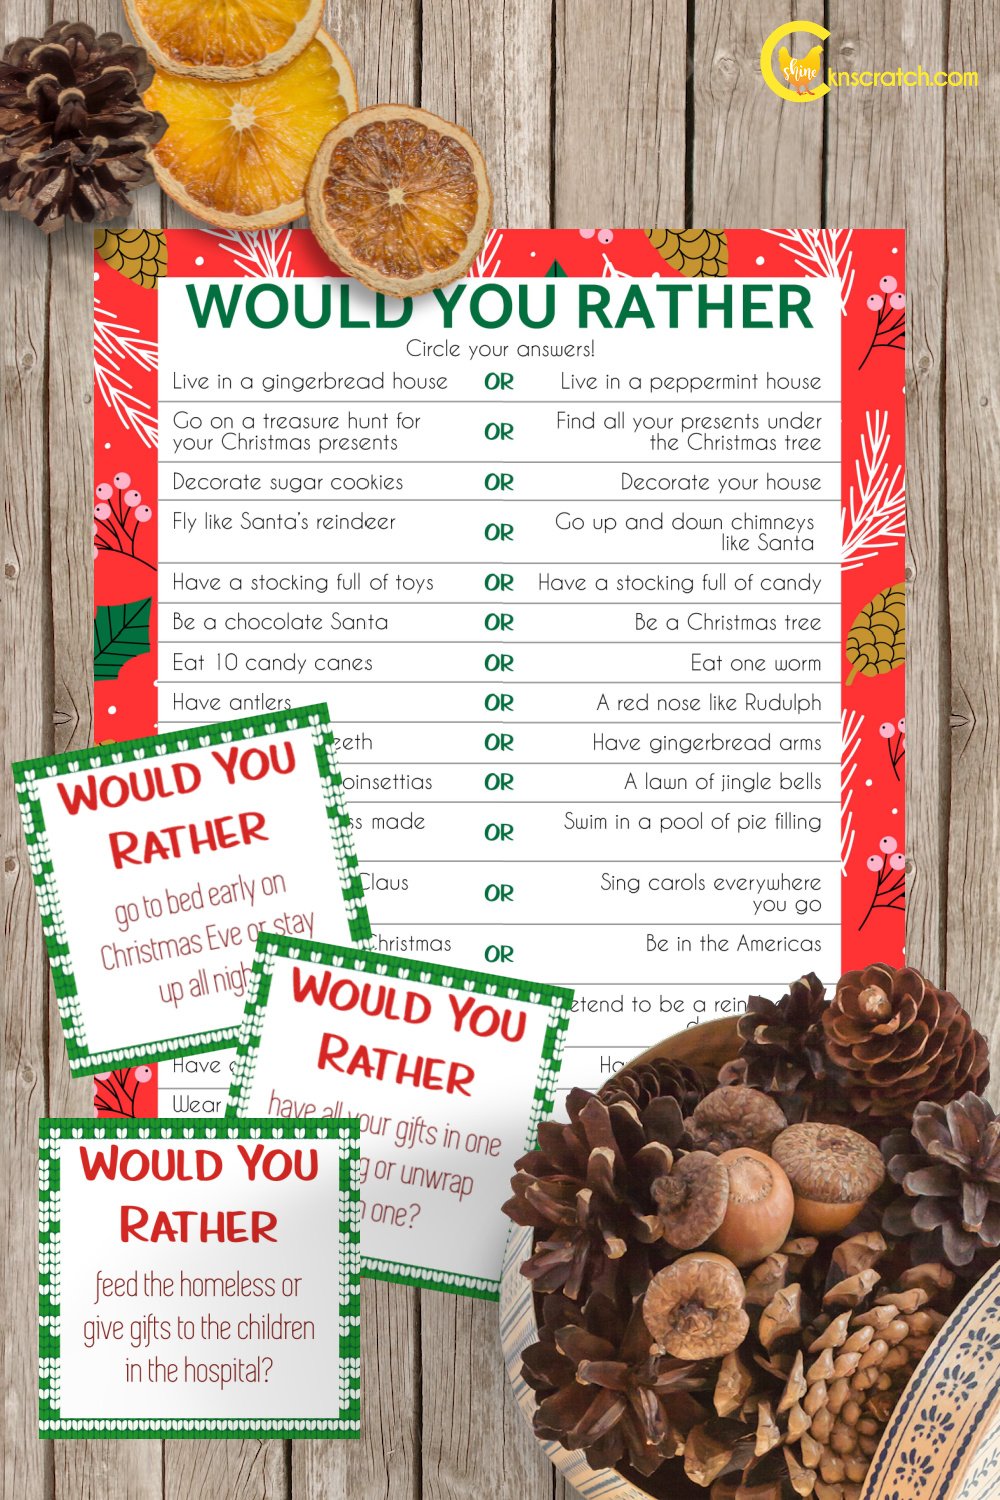 Christmas Would You Rather? - Free Printable! - Kids Activity Zone